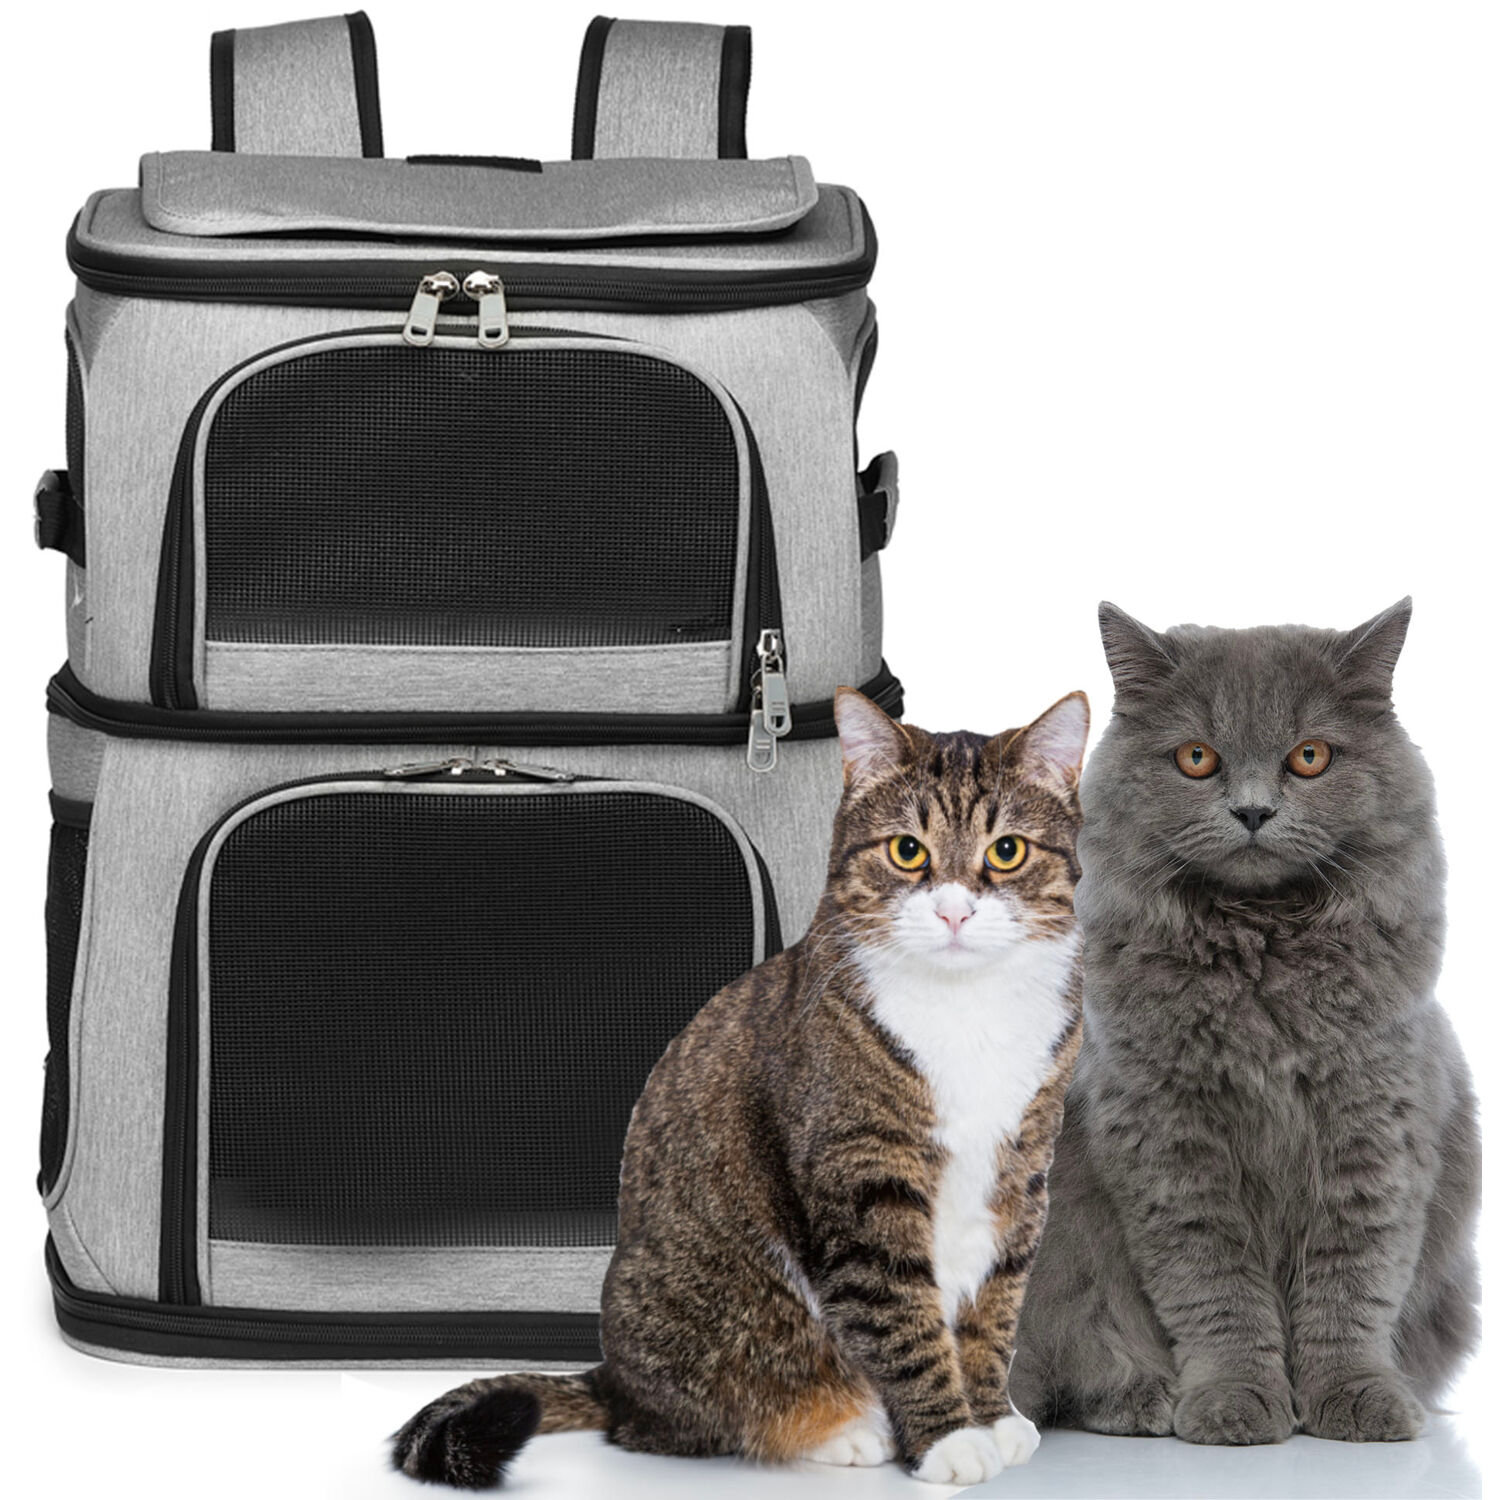 PETSFIT Cat Carrier, Pet Carrier Airline Approved, Cat Travel Carrier for  Small and Medium Cats Under 12 Lbs, Soft Sided Kitten Carrier with Cozy